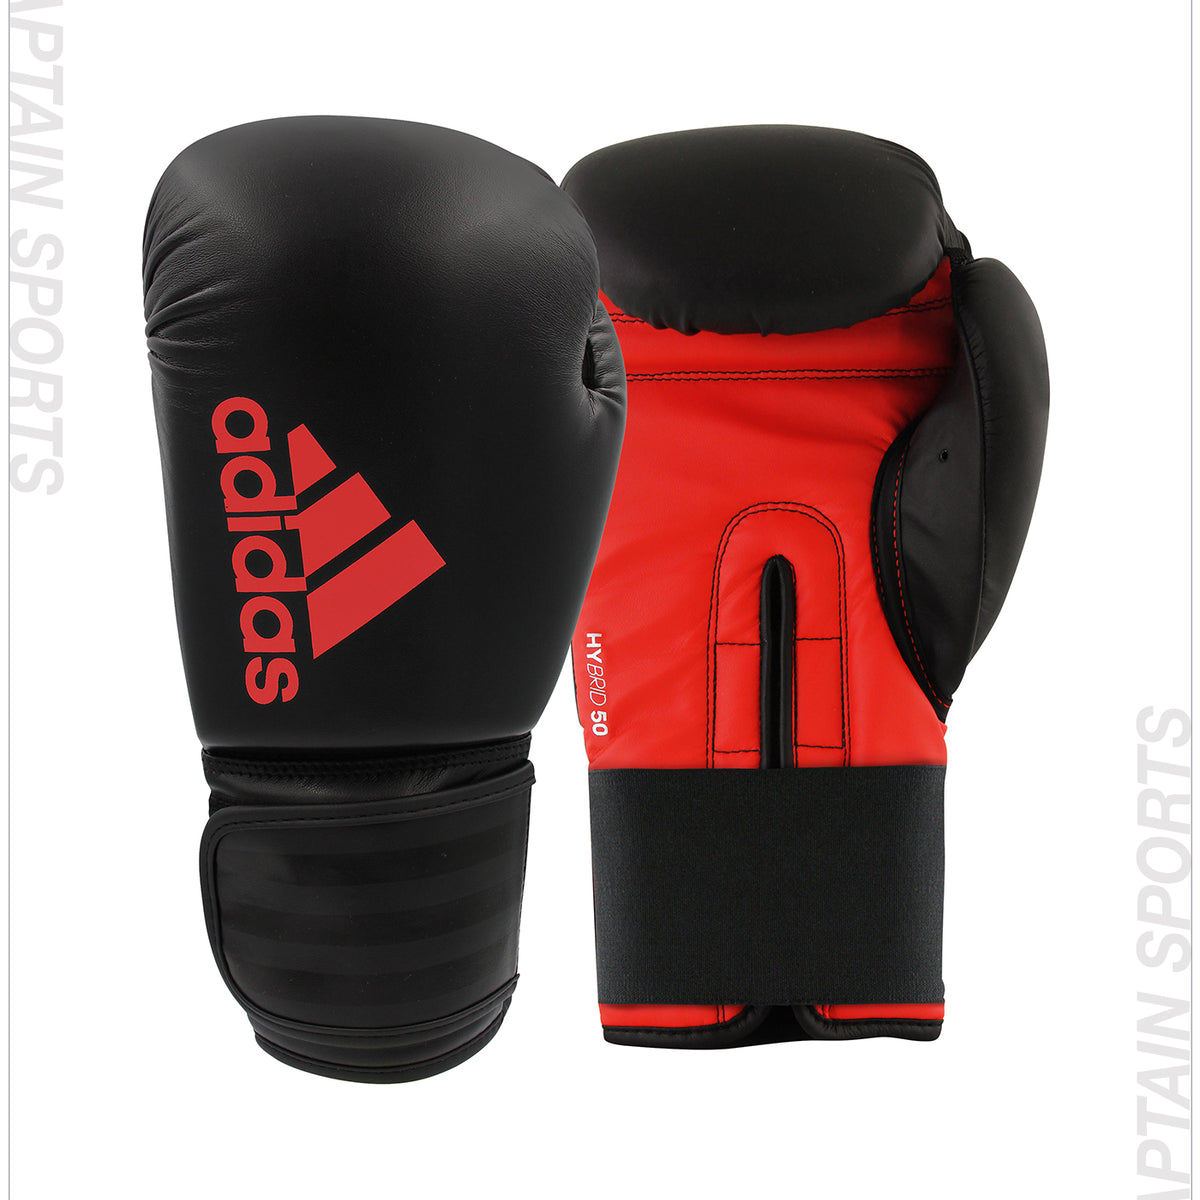 ADIDAS HYBRID 50 BOXING GLOVE BLACK/CORE RED — CAPTAIN SPORTS RETAIL